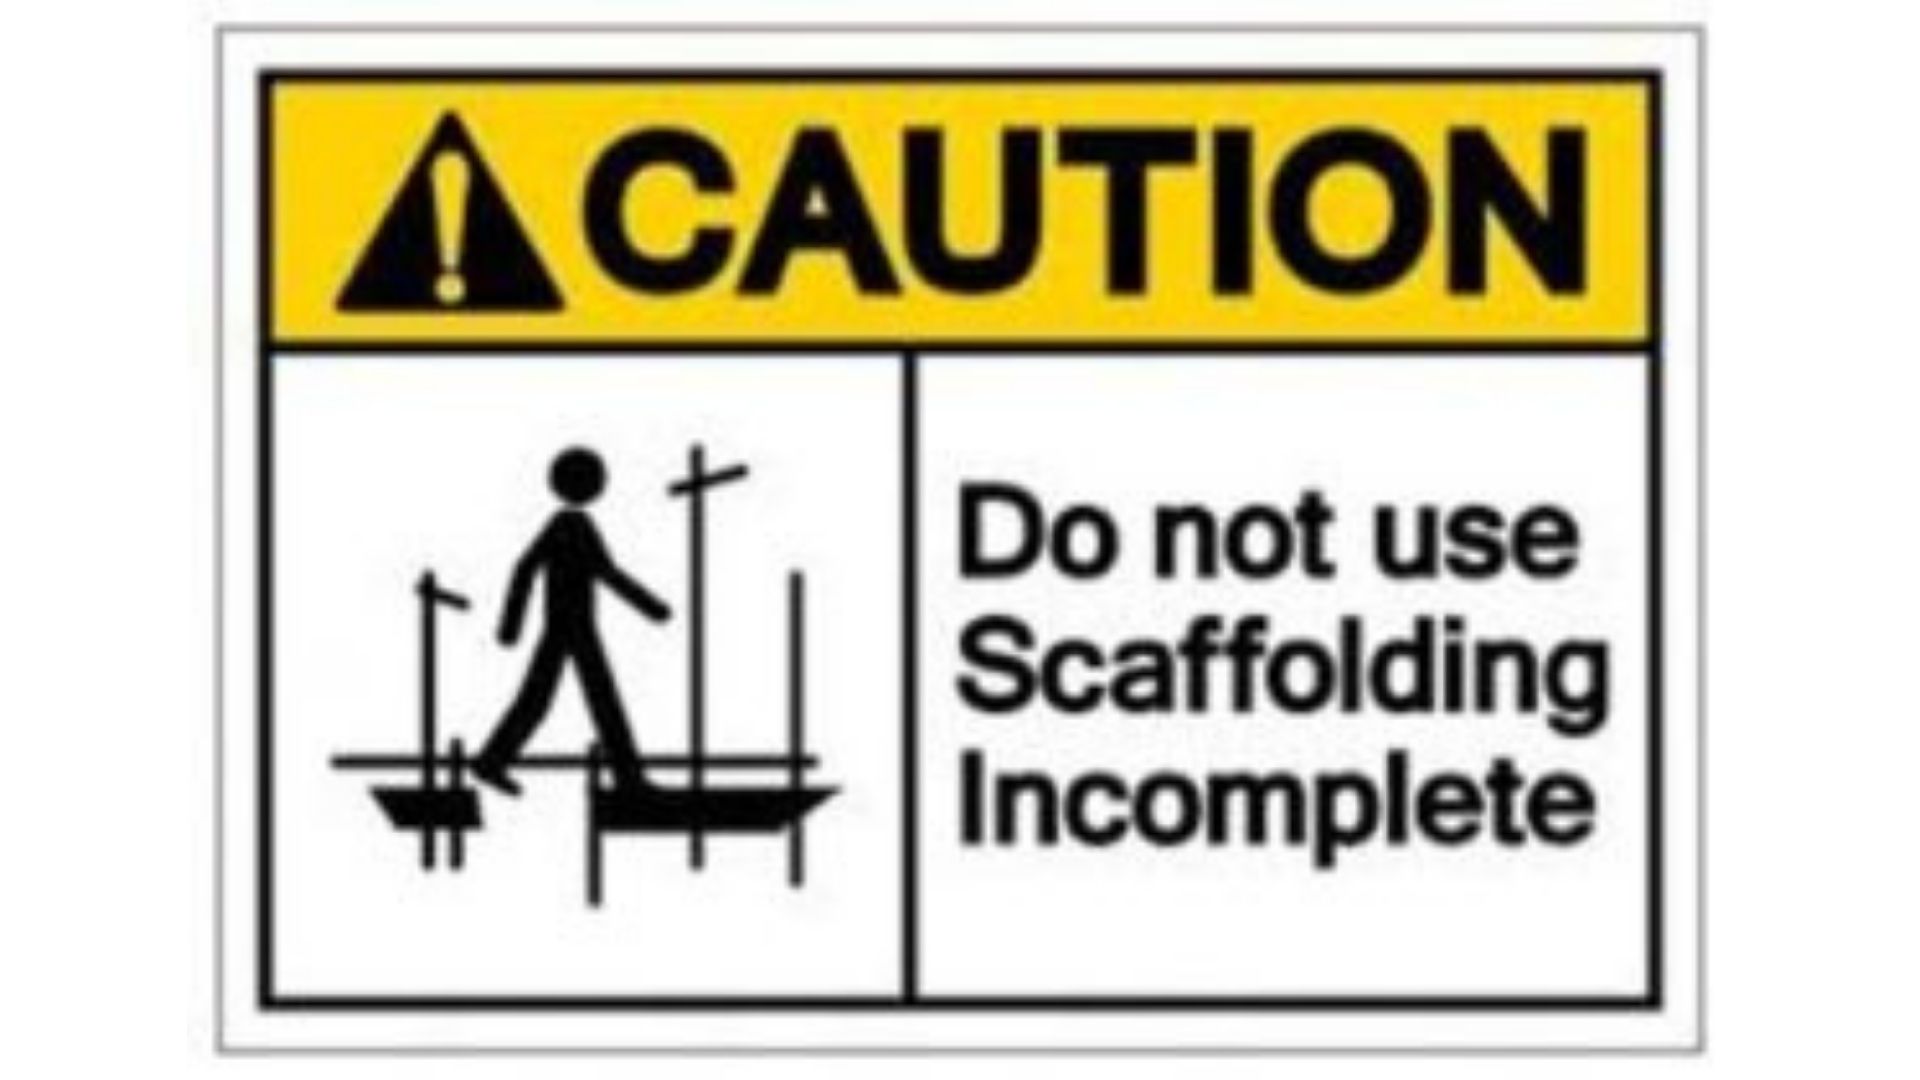 caution sign for scaffolding